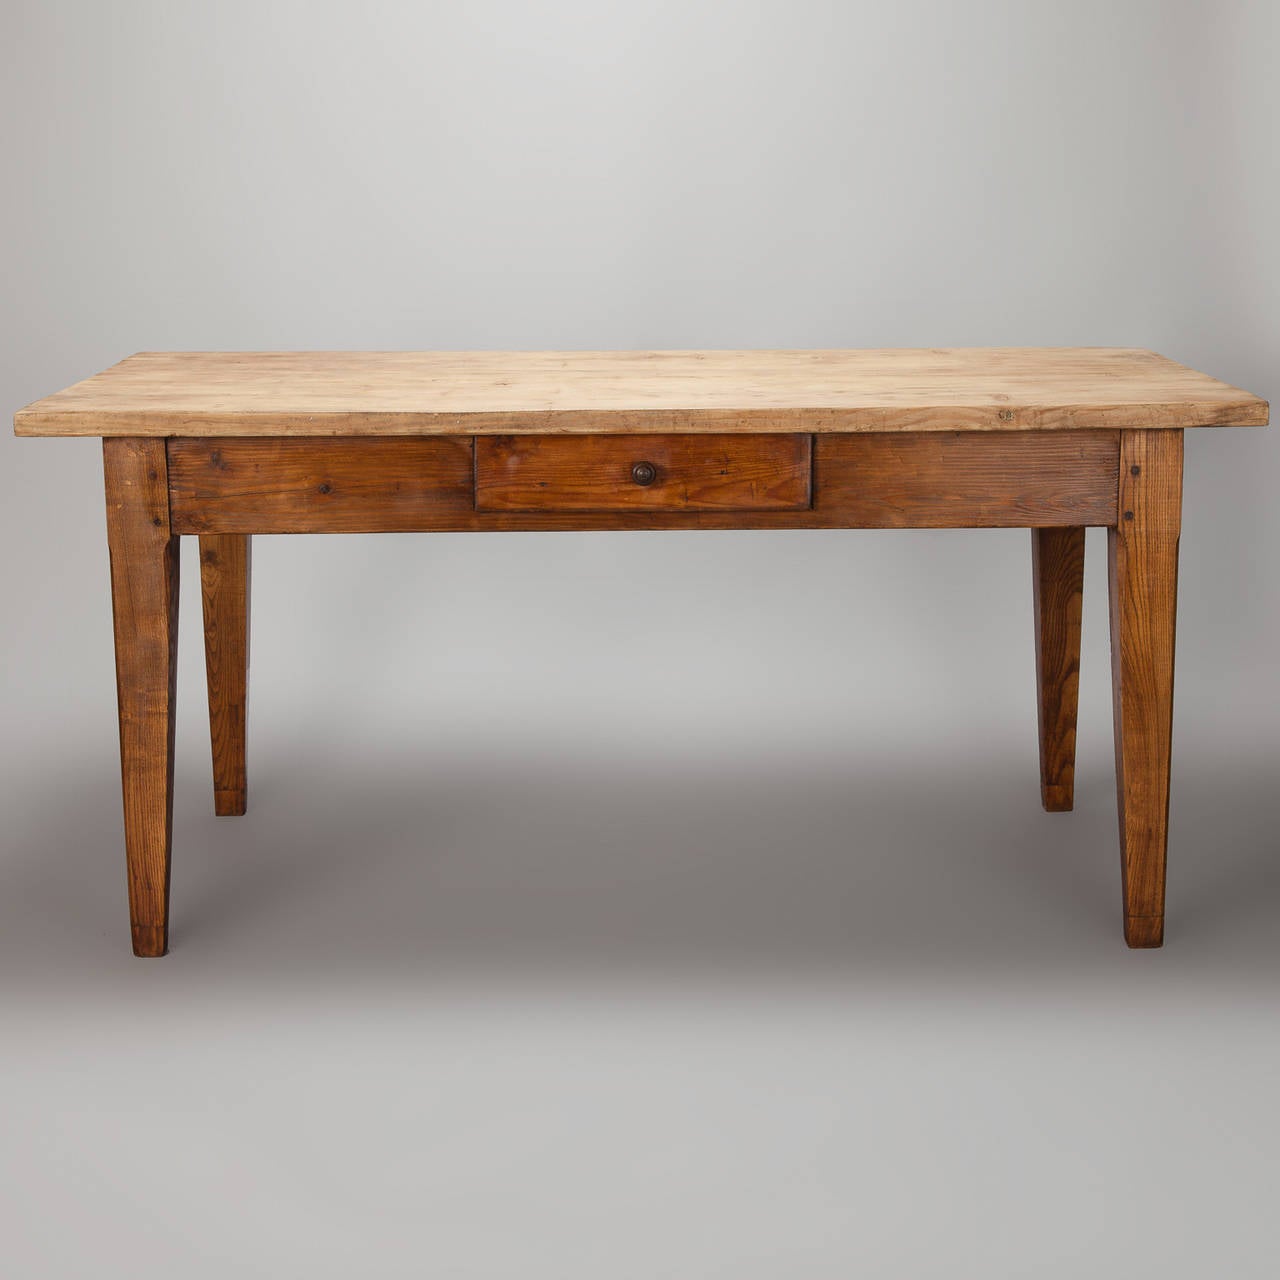 Circa 1860s French farm table has a pine table top and painted ash base with a single center drawer. Versatile size is perfect for a breakfast room, kitchen or for use as a large, rustic desk.